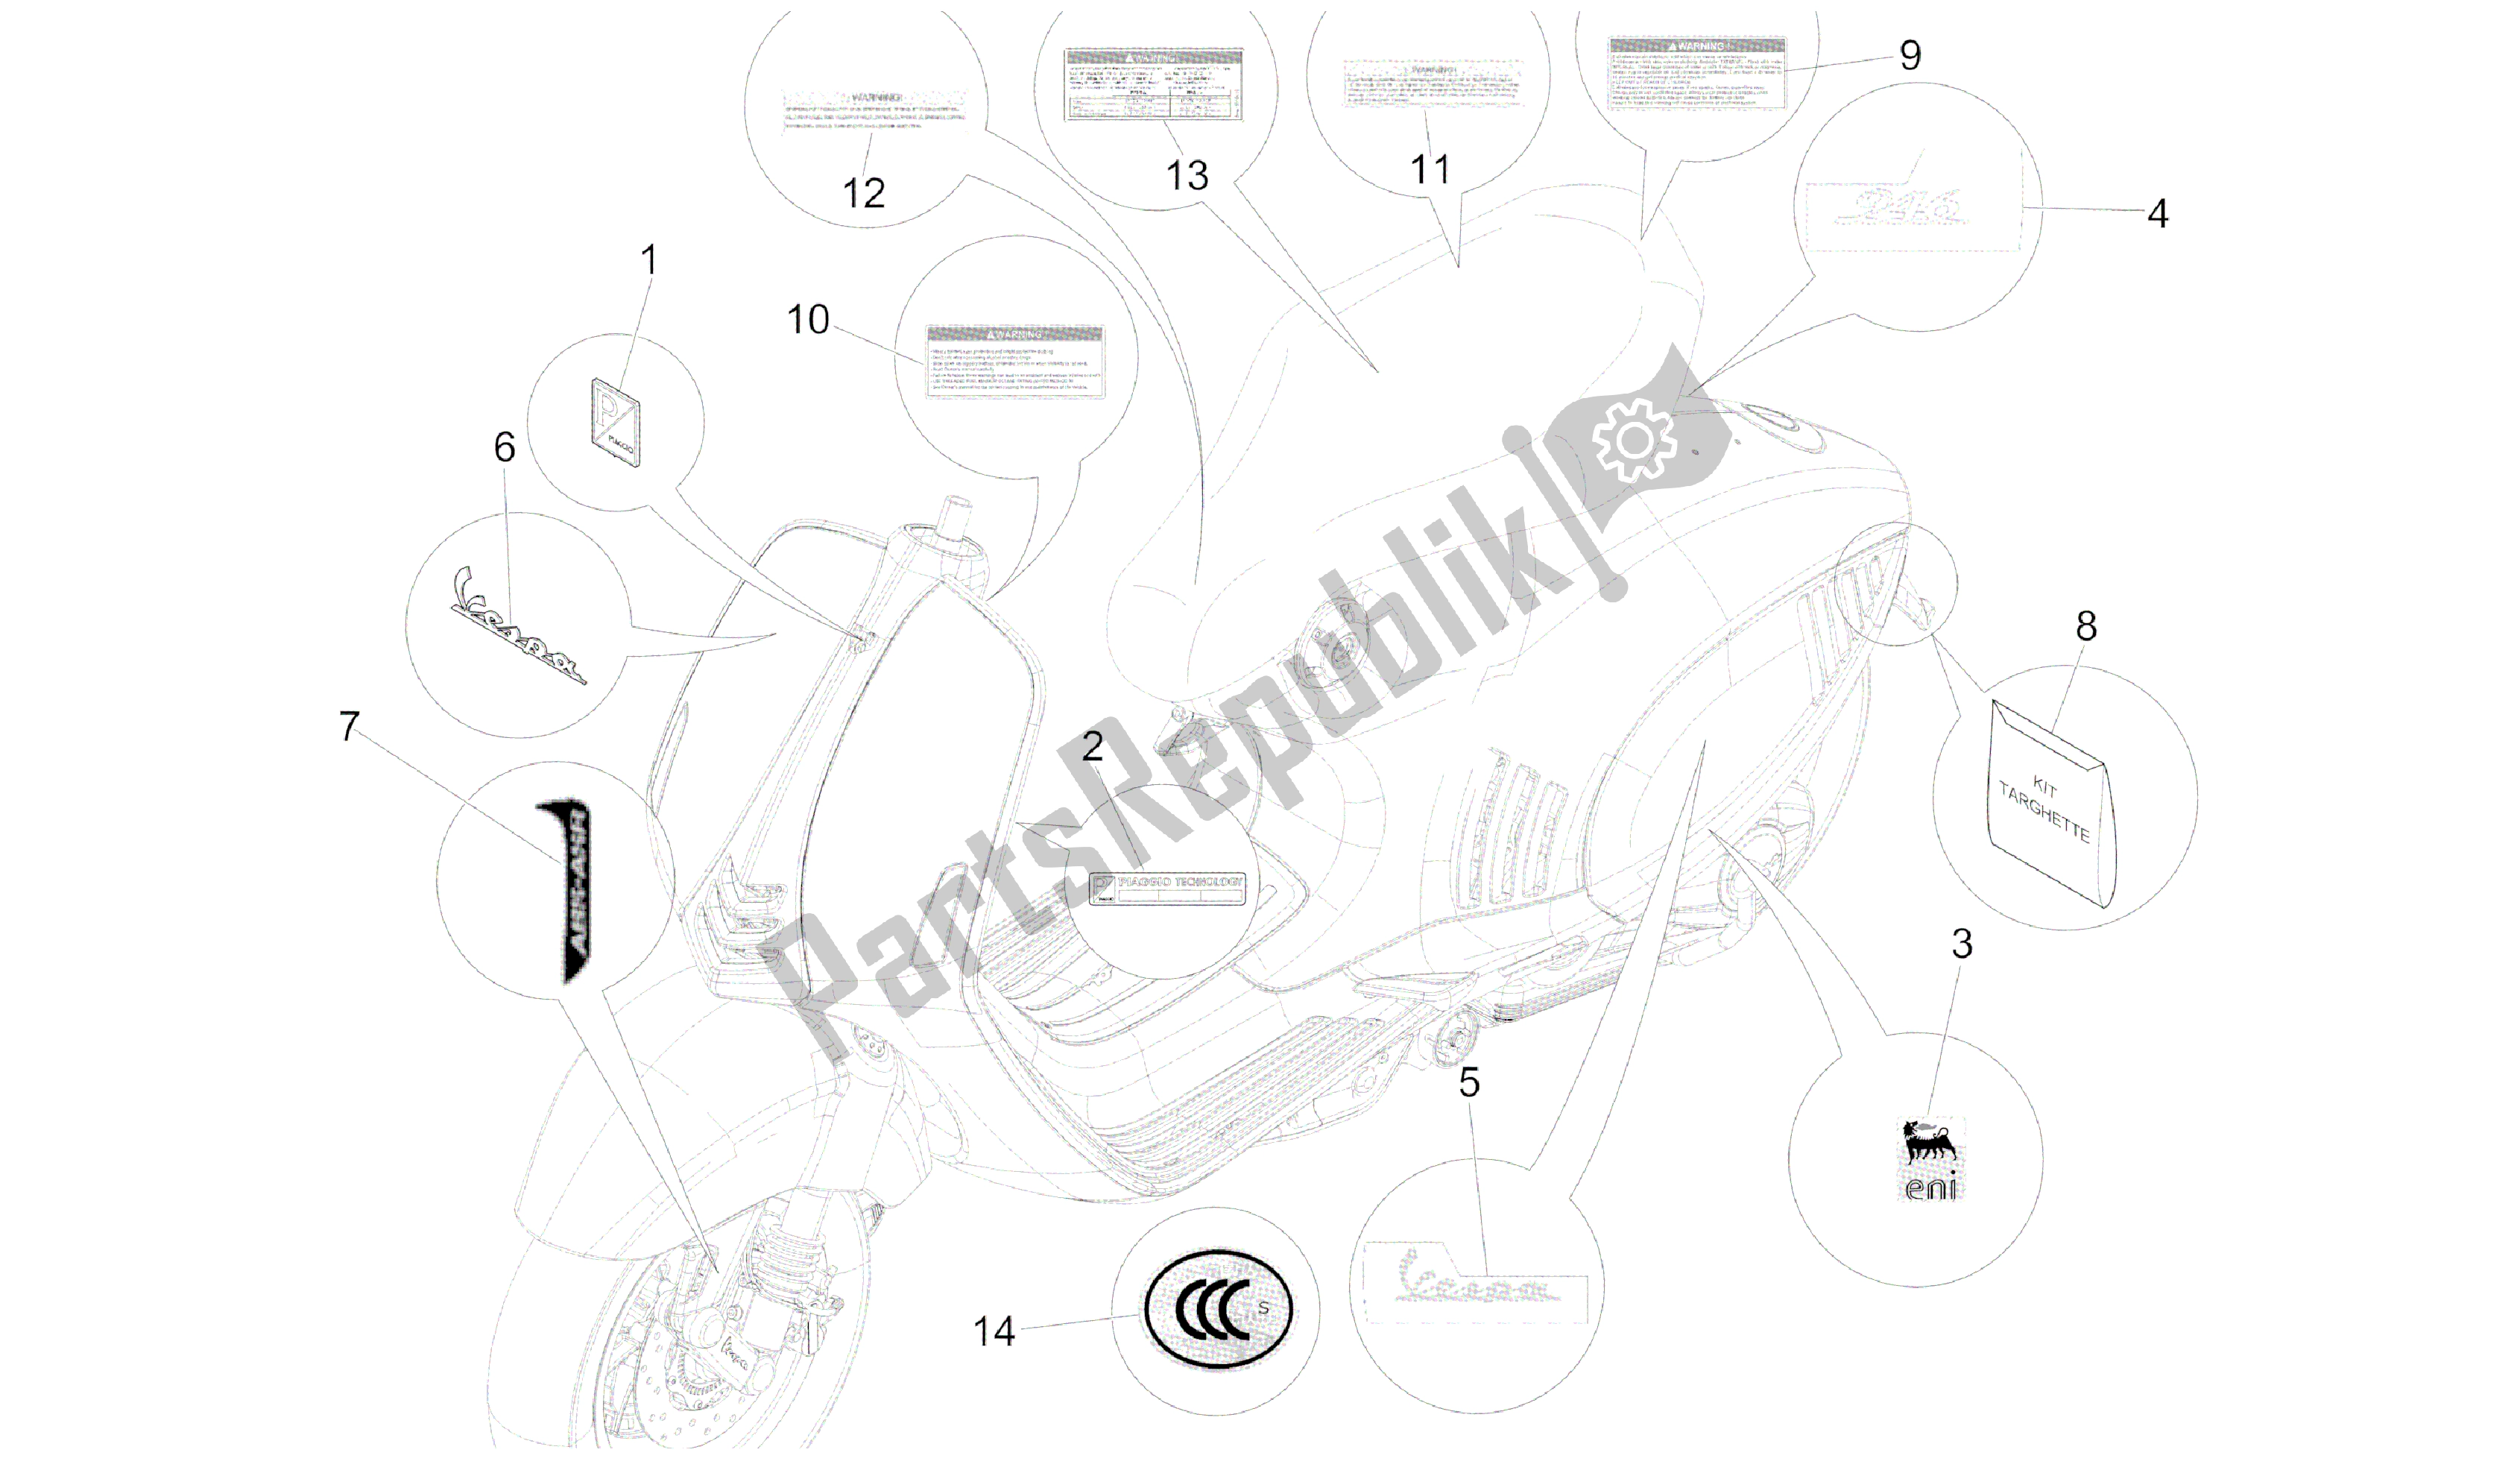 All parts for the Plates - Emblems of the Vespa 946 150 2013 - 2014